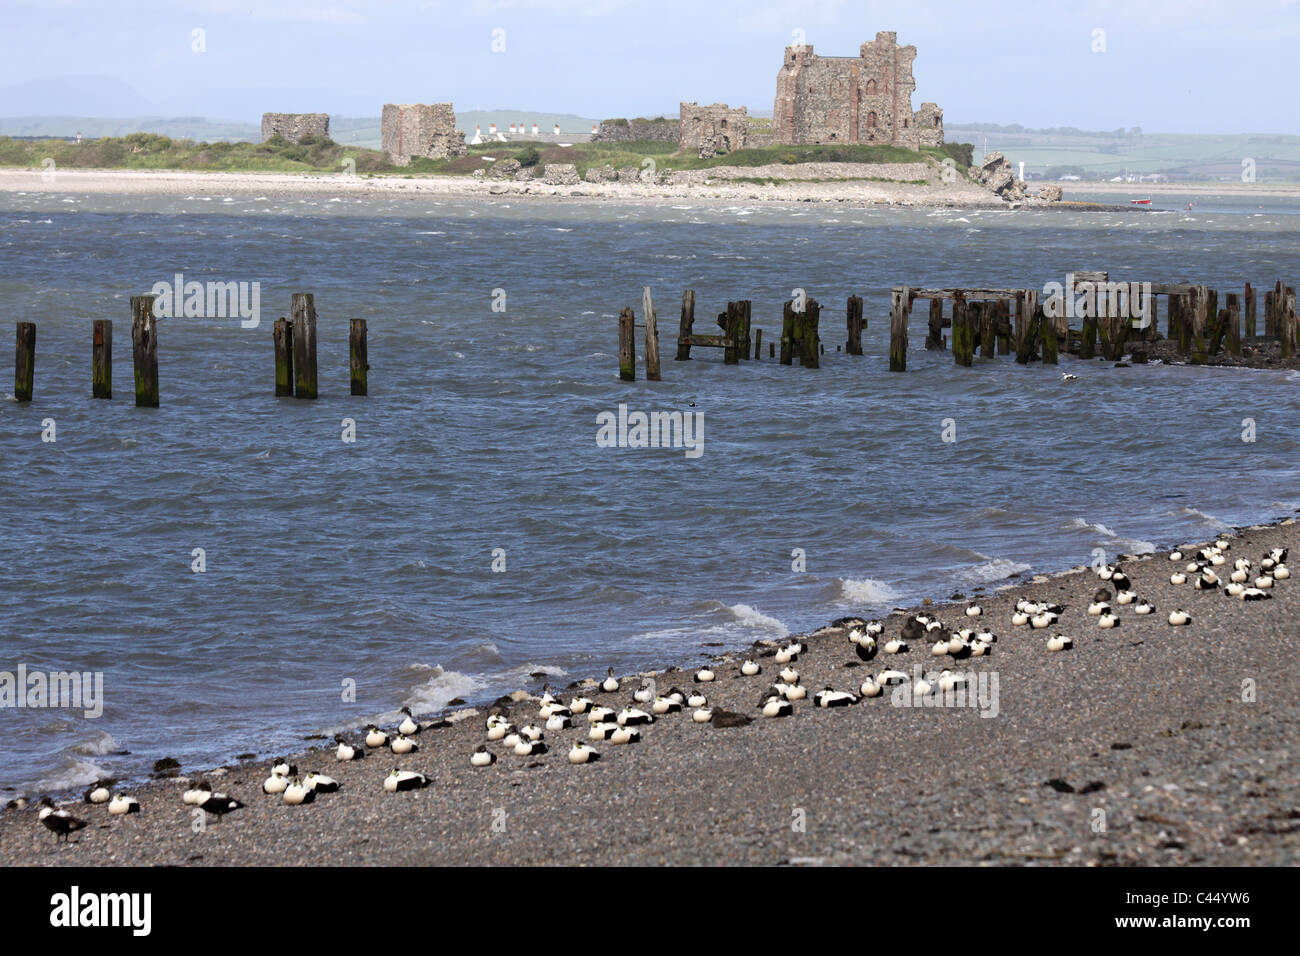 Eider Ducks Resting On The Beach With Piel Castle As The Backdrop, At Walney Island, Cumbria, UK Stock Photo